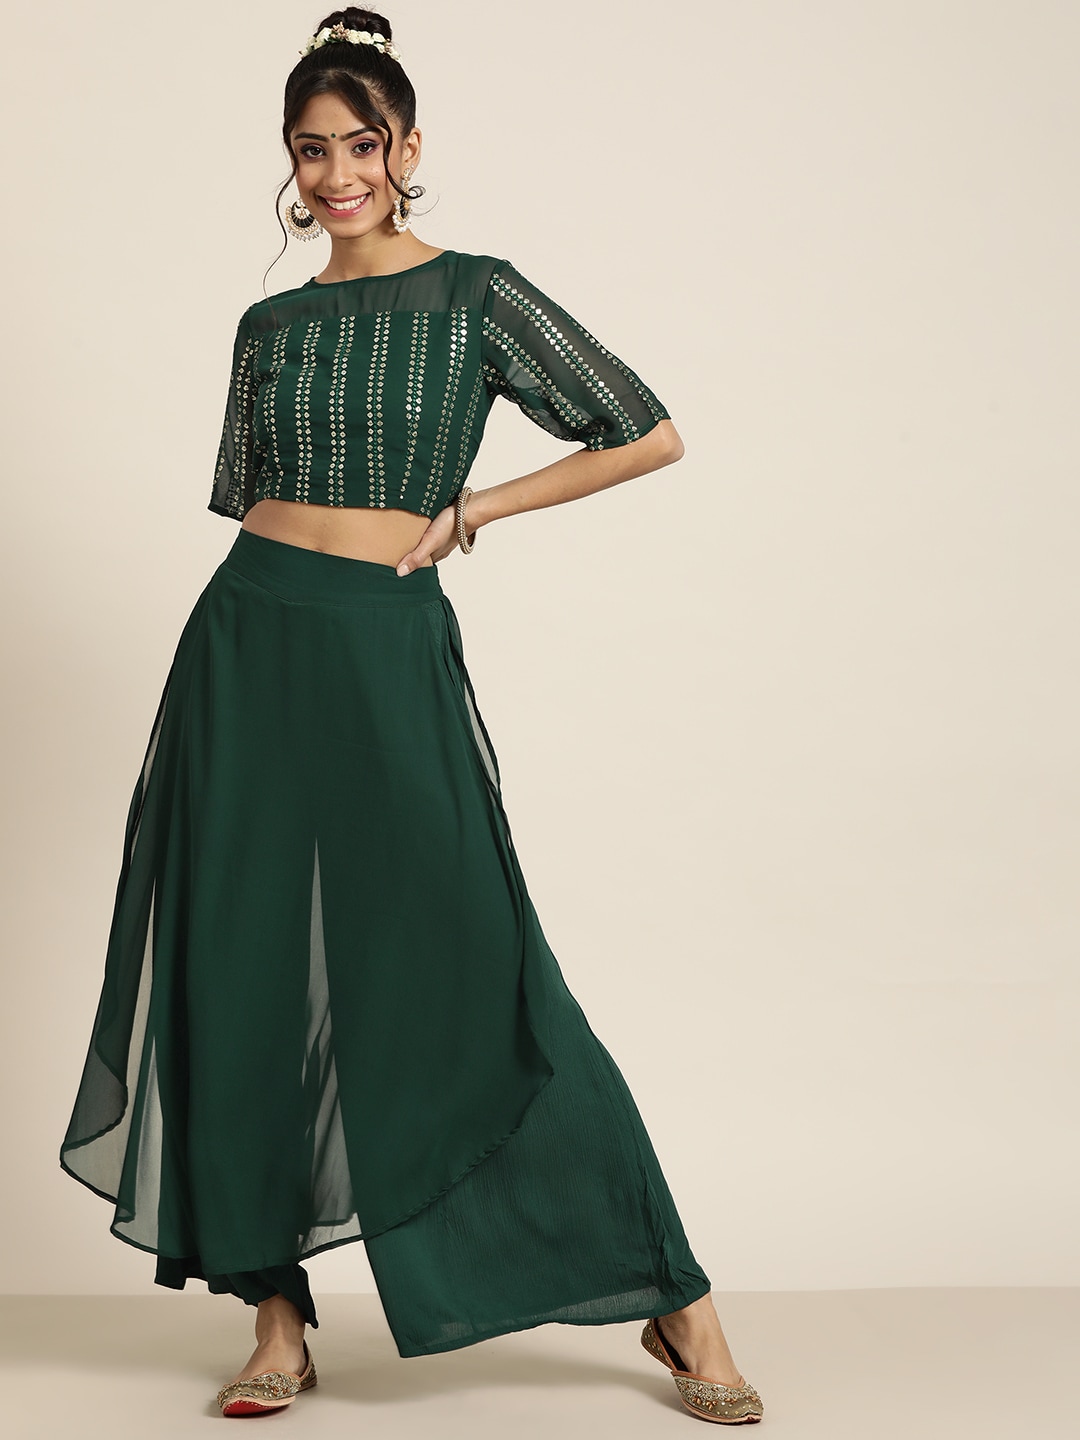 Juniper Women Green & Gold-Toned Printed Top with Palazzos Price in India